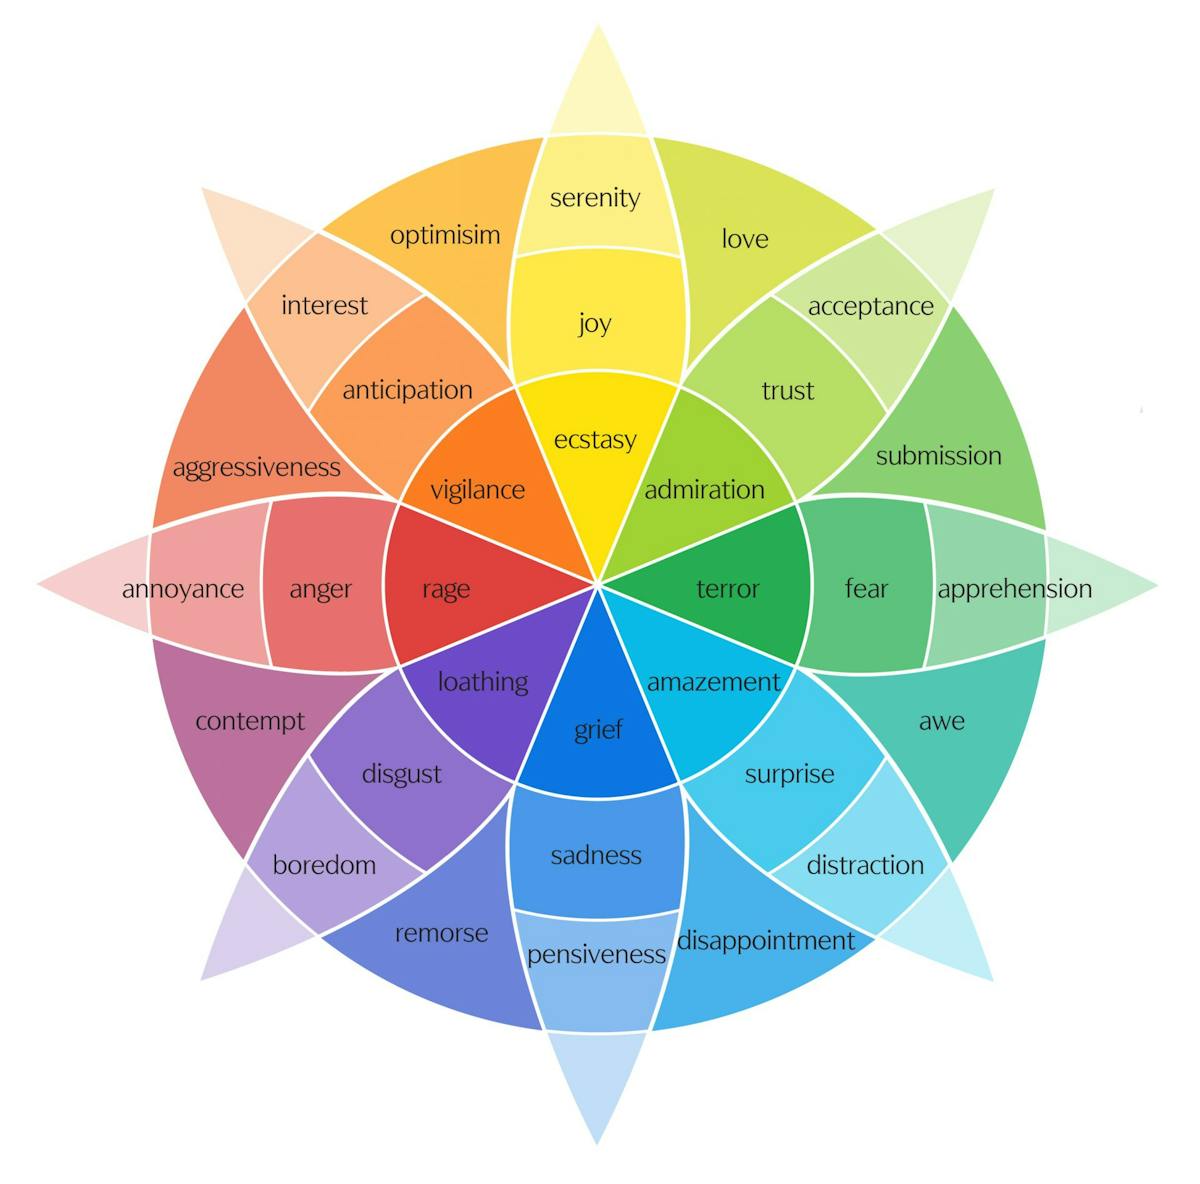 Mental health: how to use an ‘emotion wheel’ to identify moods